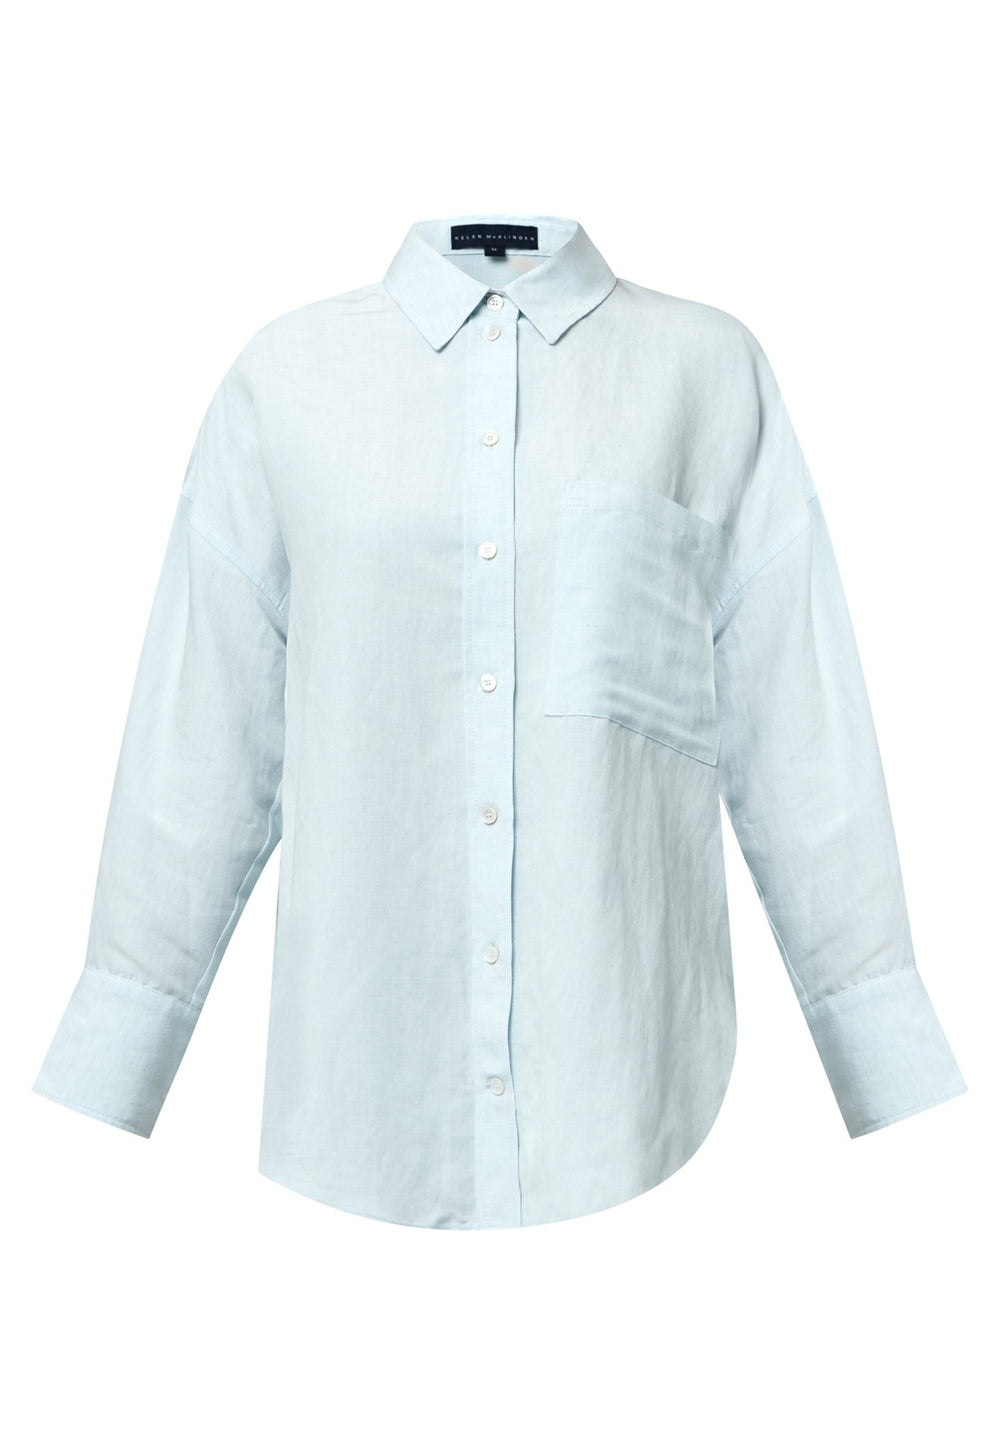 Embrace effortless style with this sustainable linen boyfriend shirt in a versatile blue hue. Its oversized, minimalist design includes long sleeves and a classic collar, offering timeless appeal. The button-through front and rounded hem meld comfort with style, establishing it as a versatile wardrobe essential.